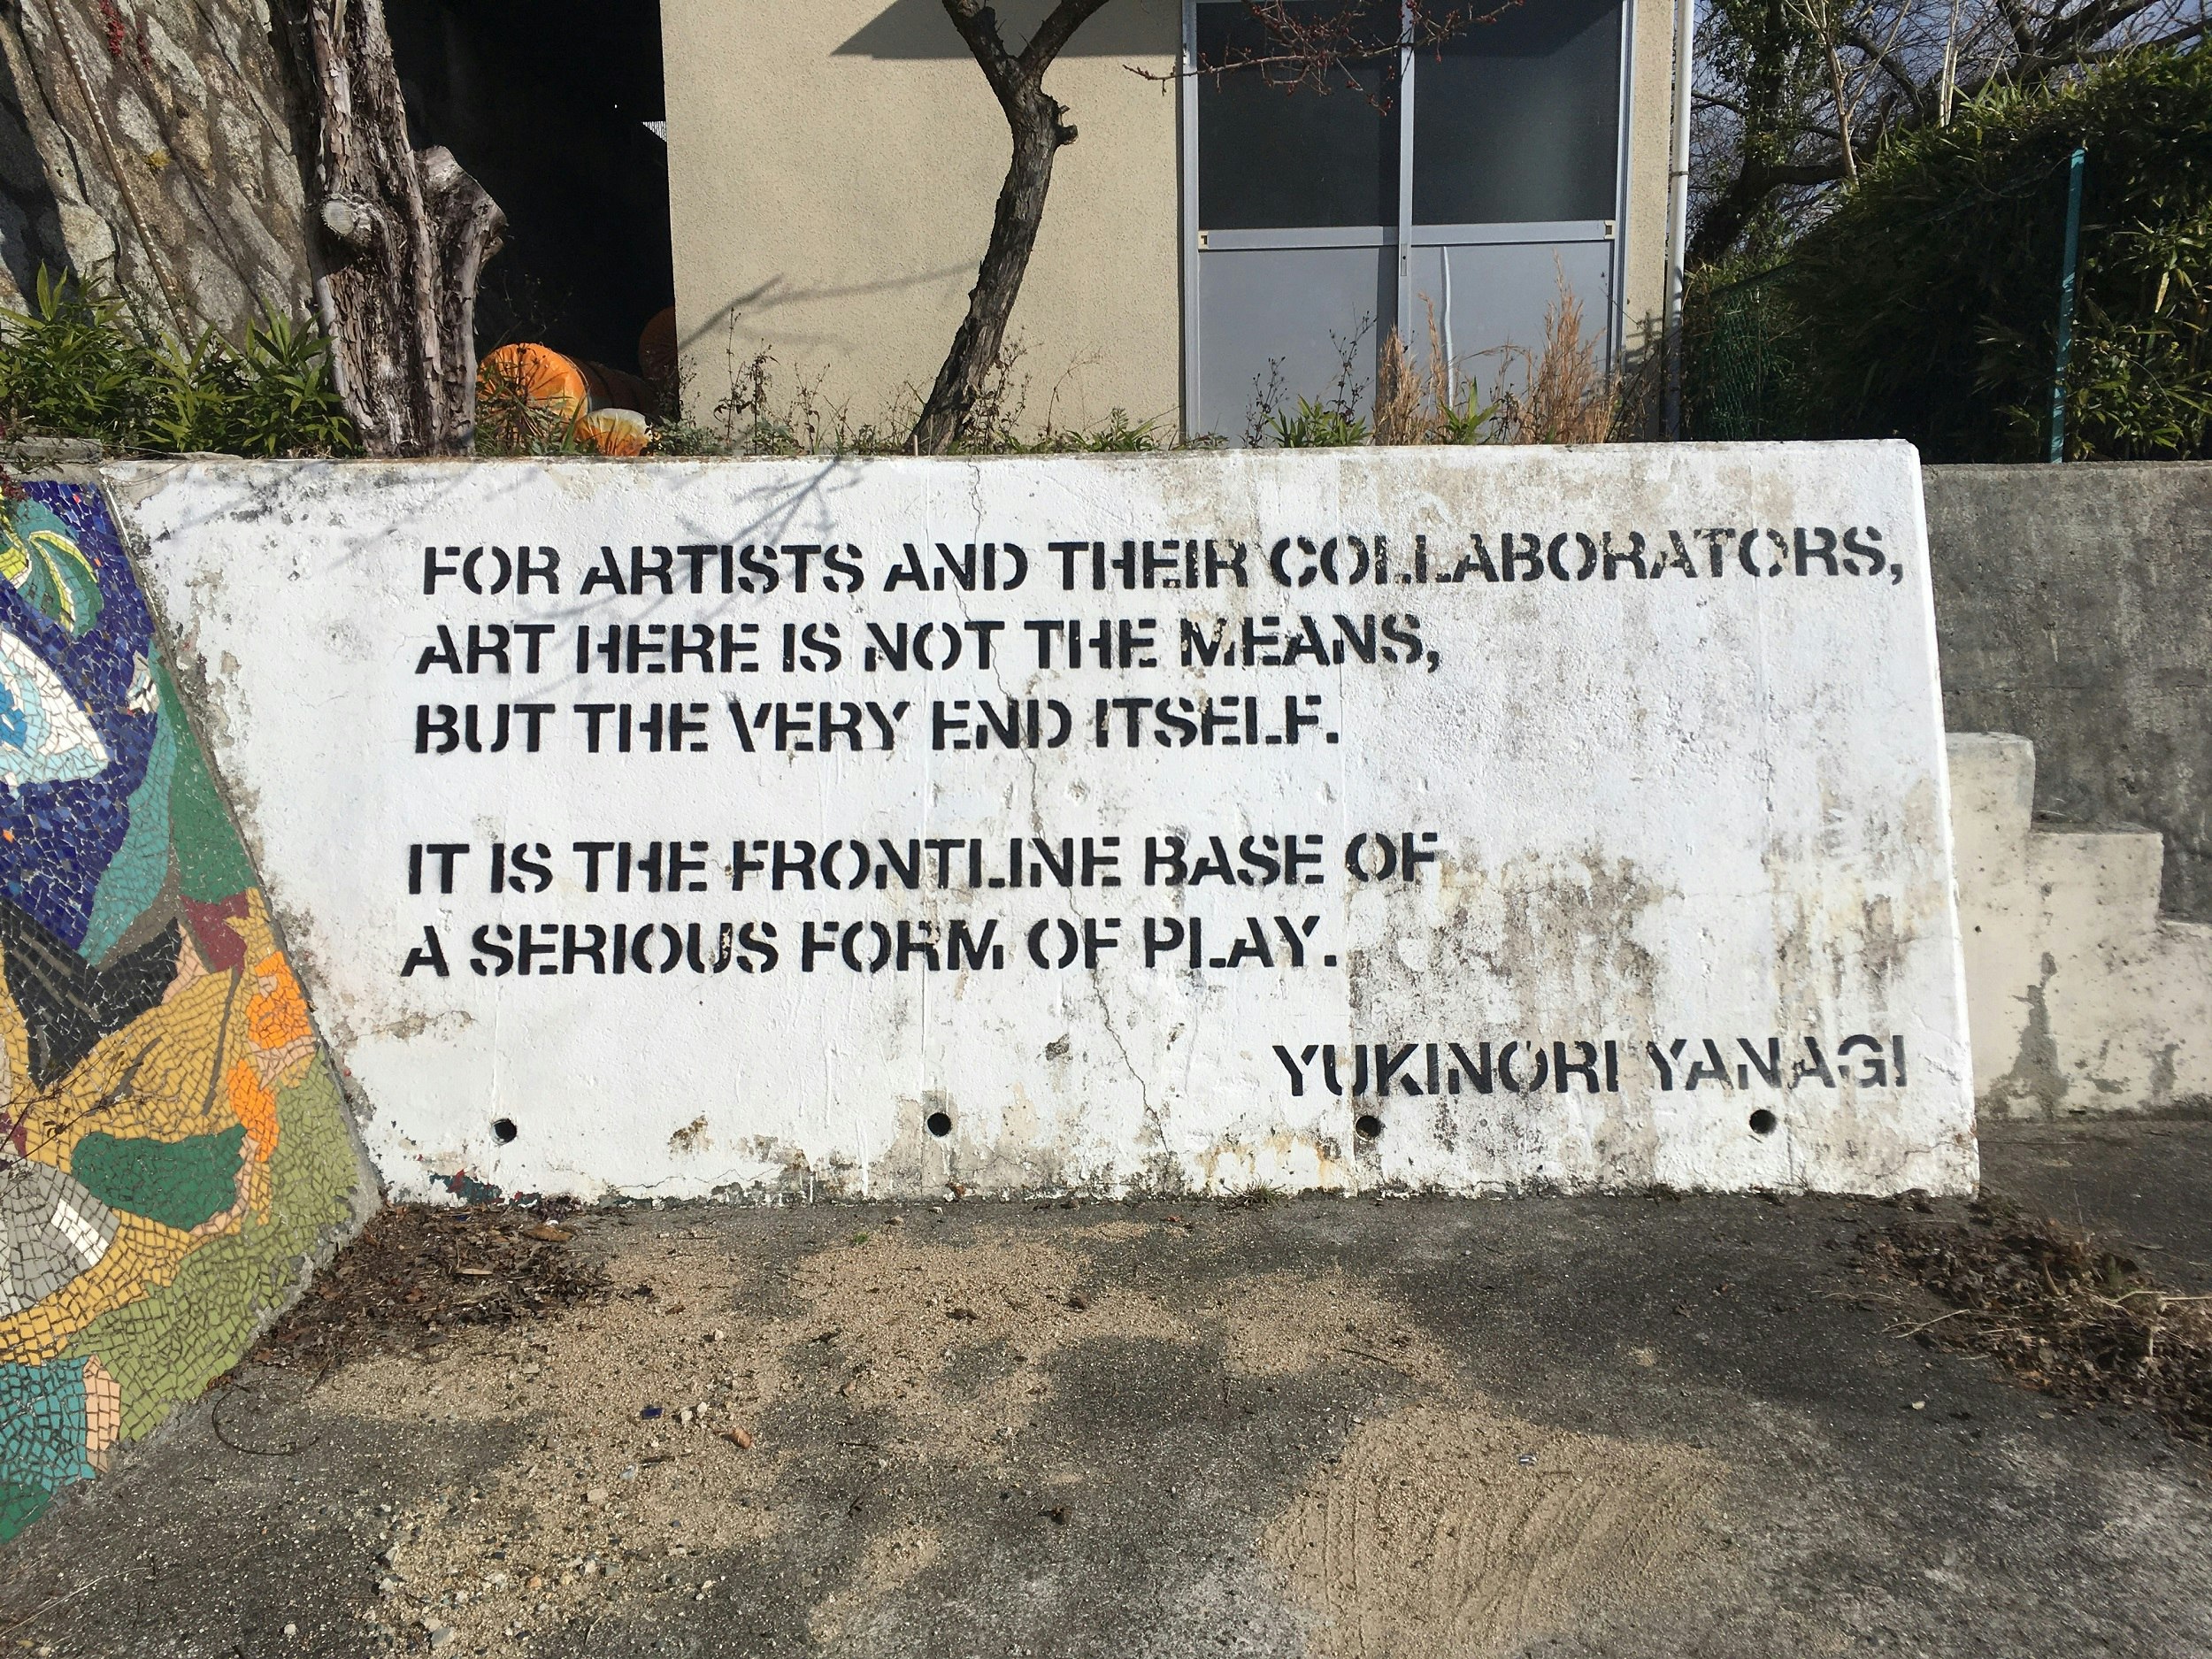 Words painted in black on a white wall, which read: "For artists and their collaborators, art here is not the means, but the very end itself. It is the frontline base for a very serious form of play. Yukinori Yanagi".